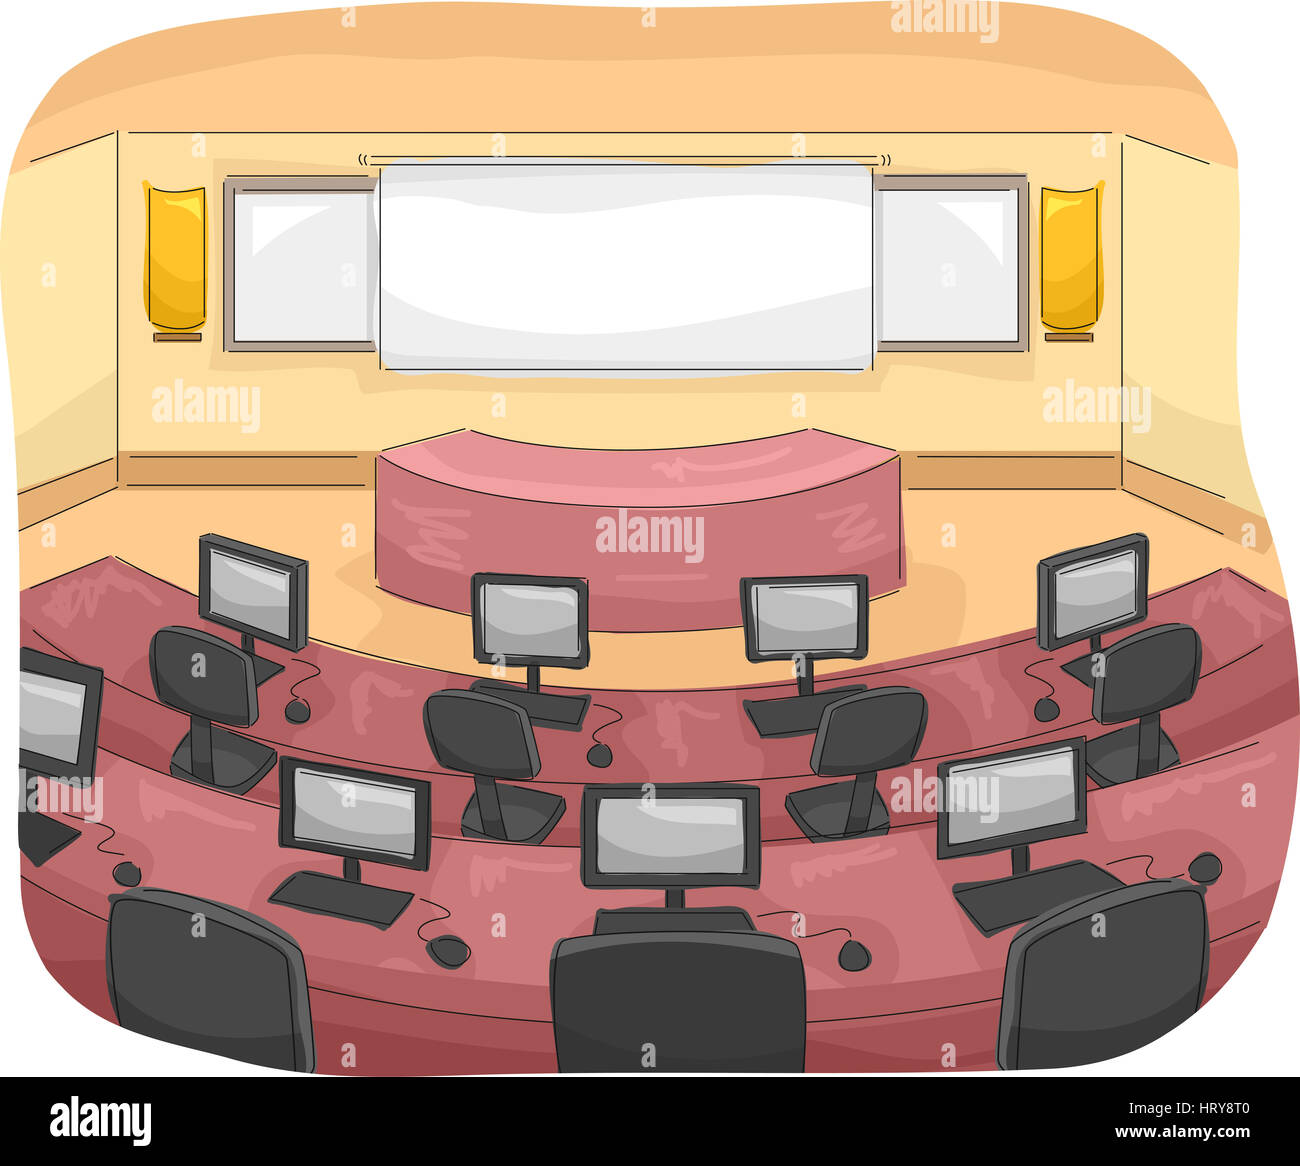 Illustration of a Multimedia Room with Individual Computers Assigned to Each Seat Stock Photo